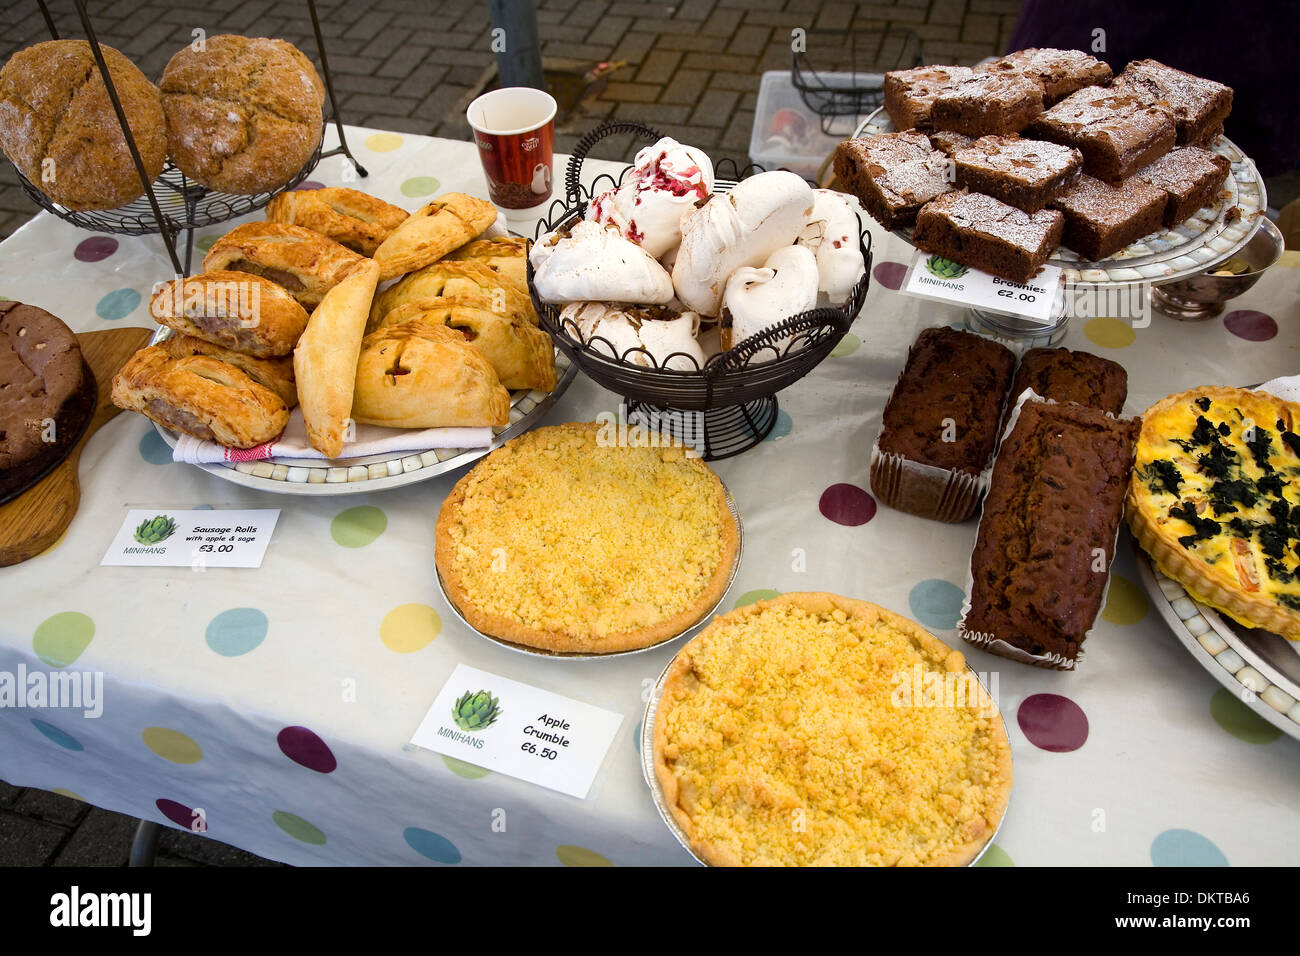 Pastry in an agricultural Market. Stock Photo